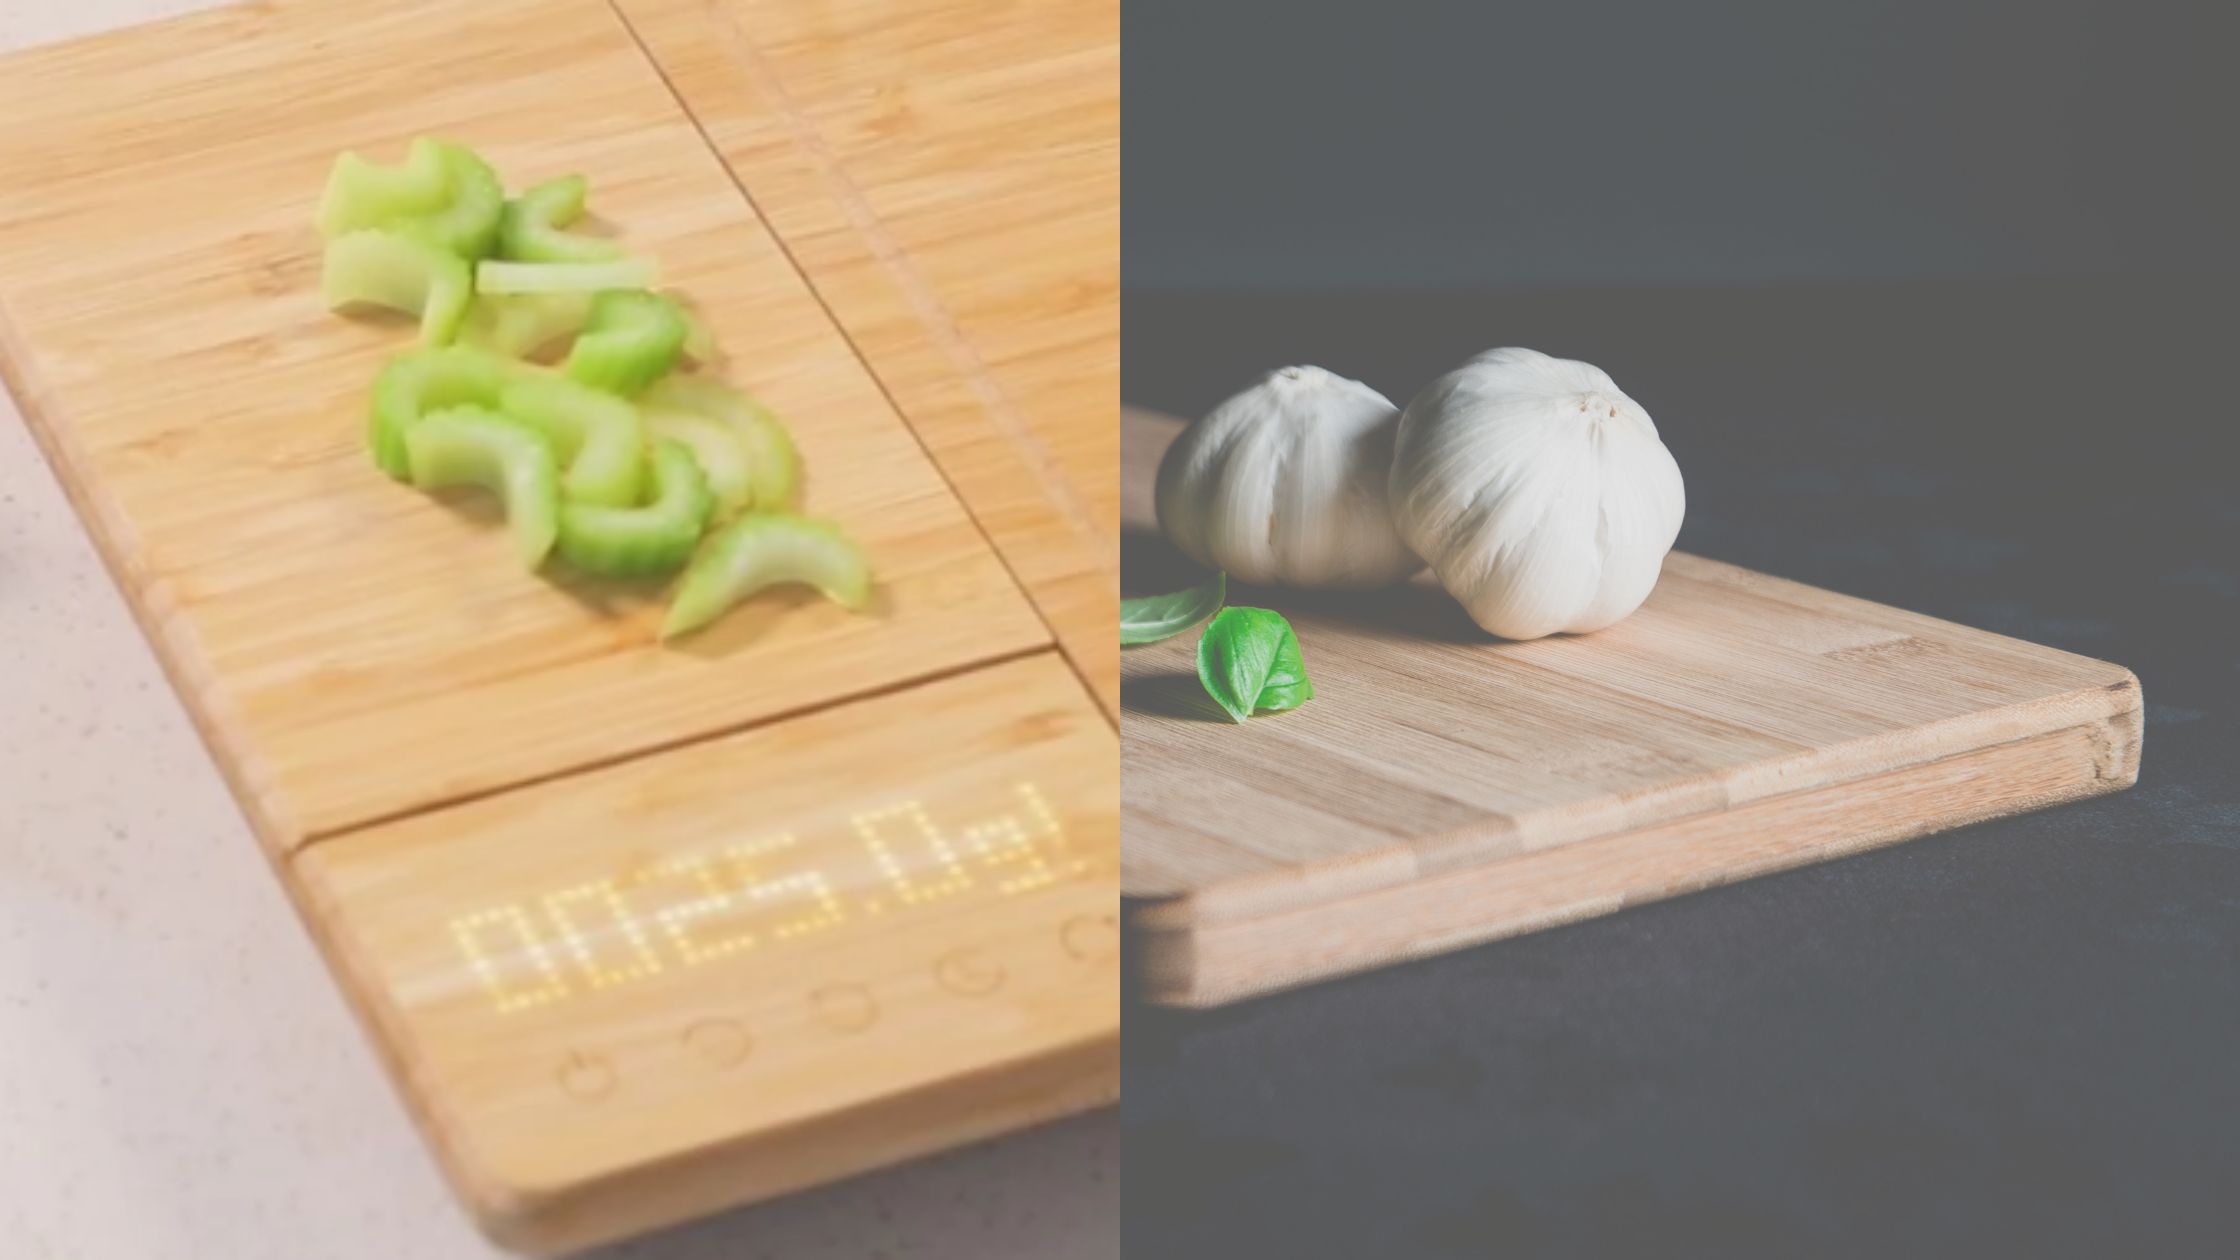 What functionalities could a smart cutting board provide over normal cutting  board?